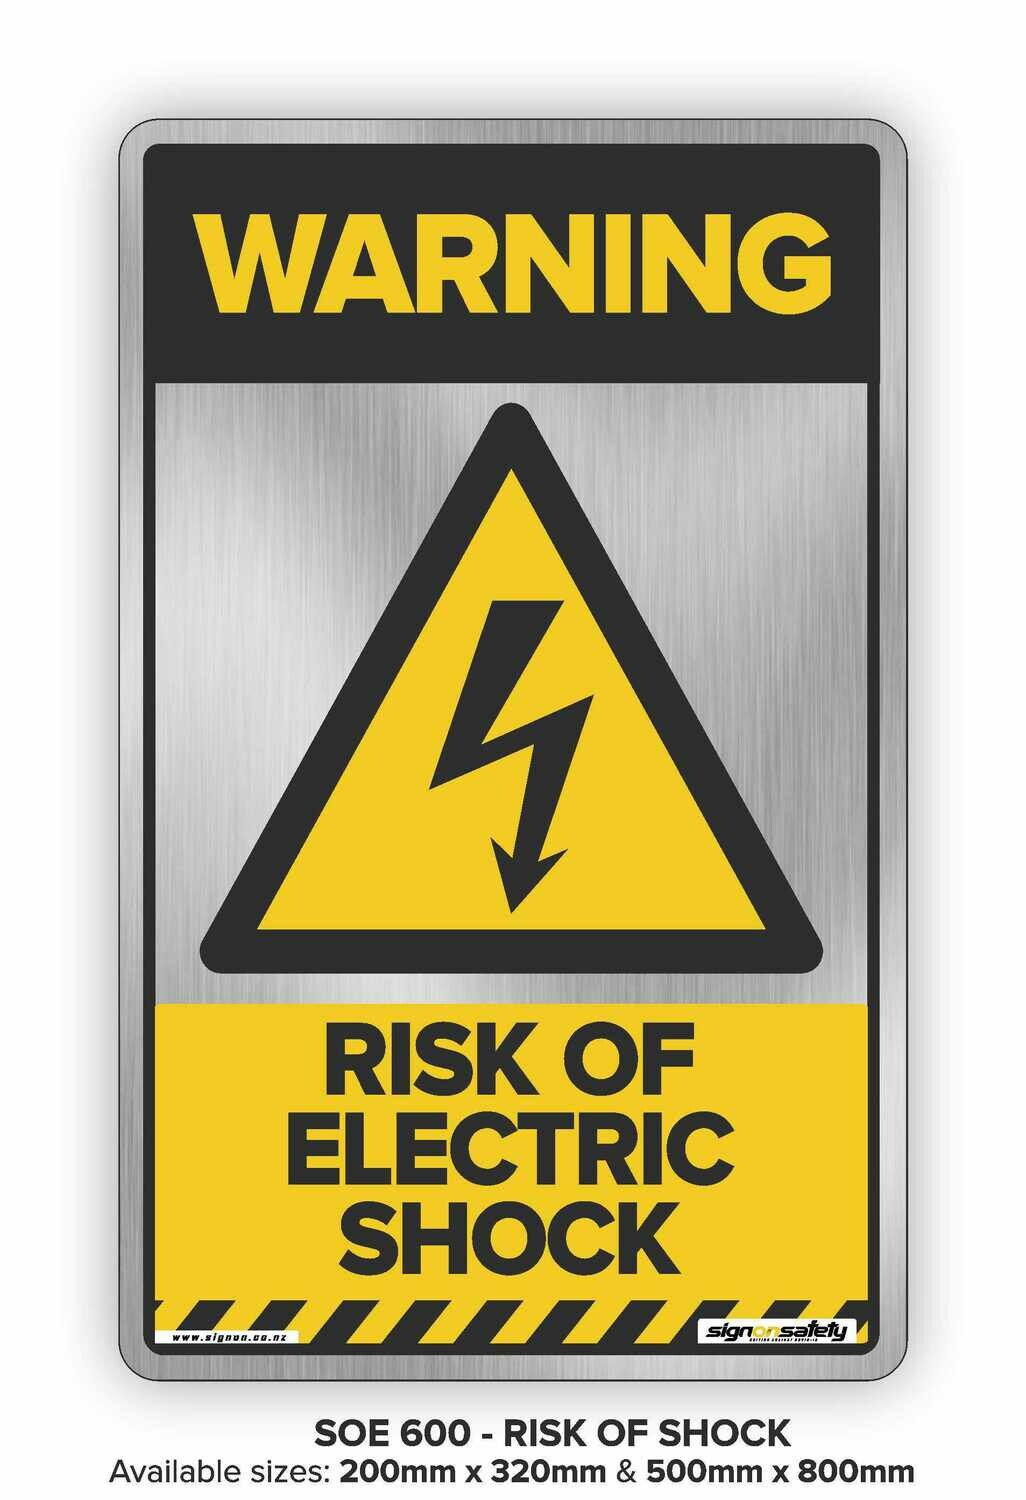 Warning - Risk Of Electric Shock